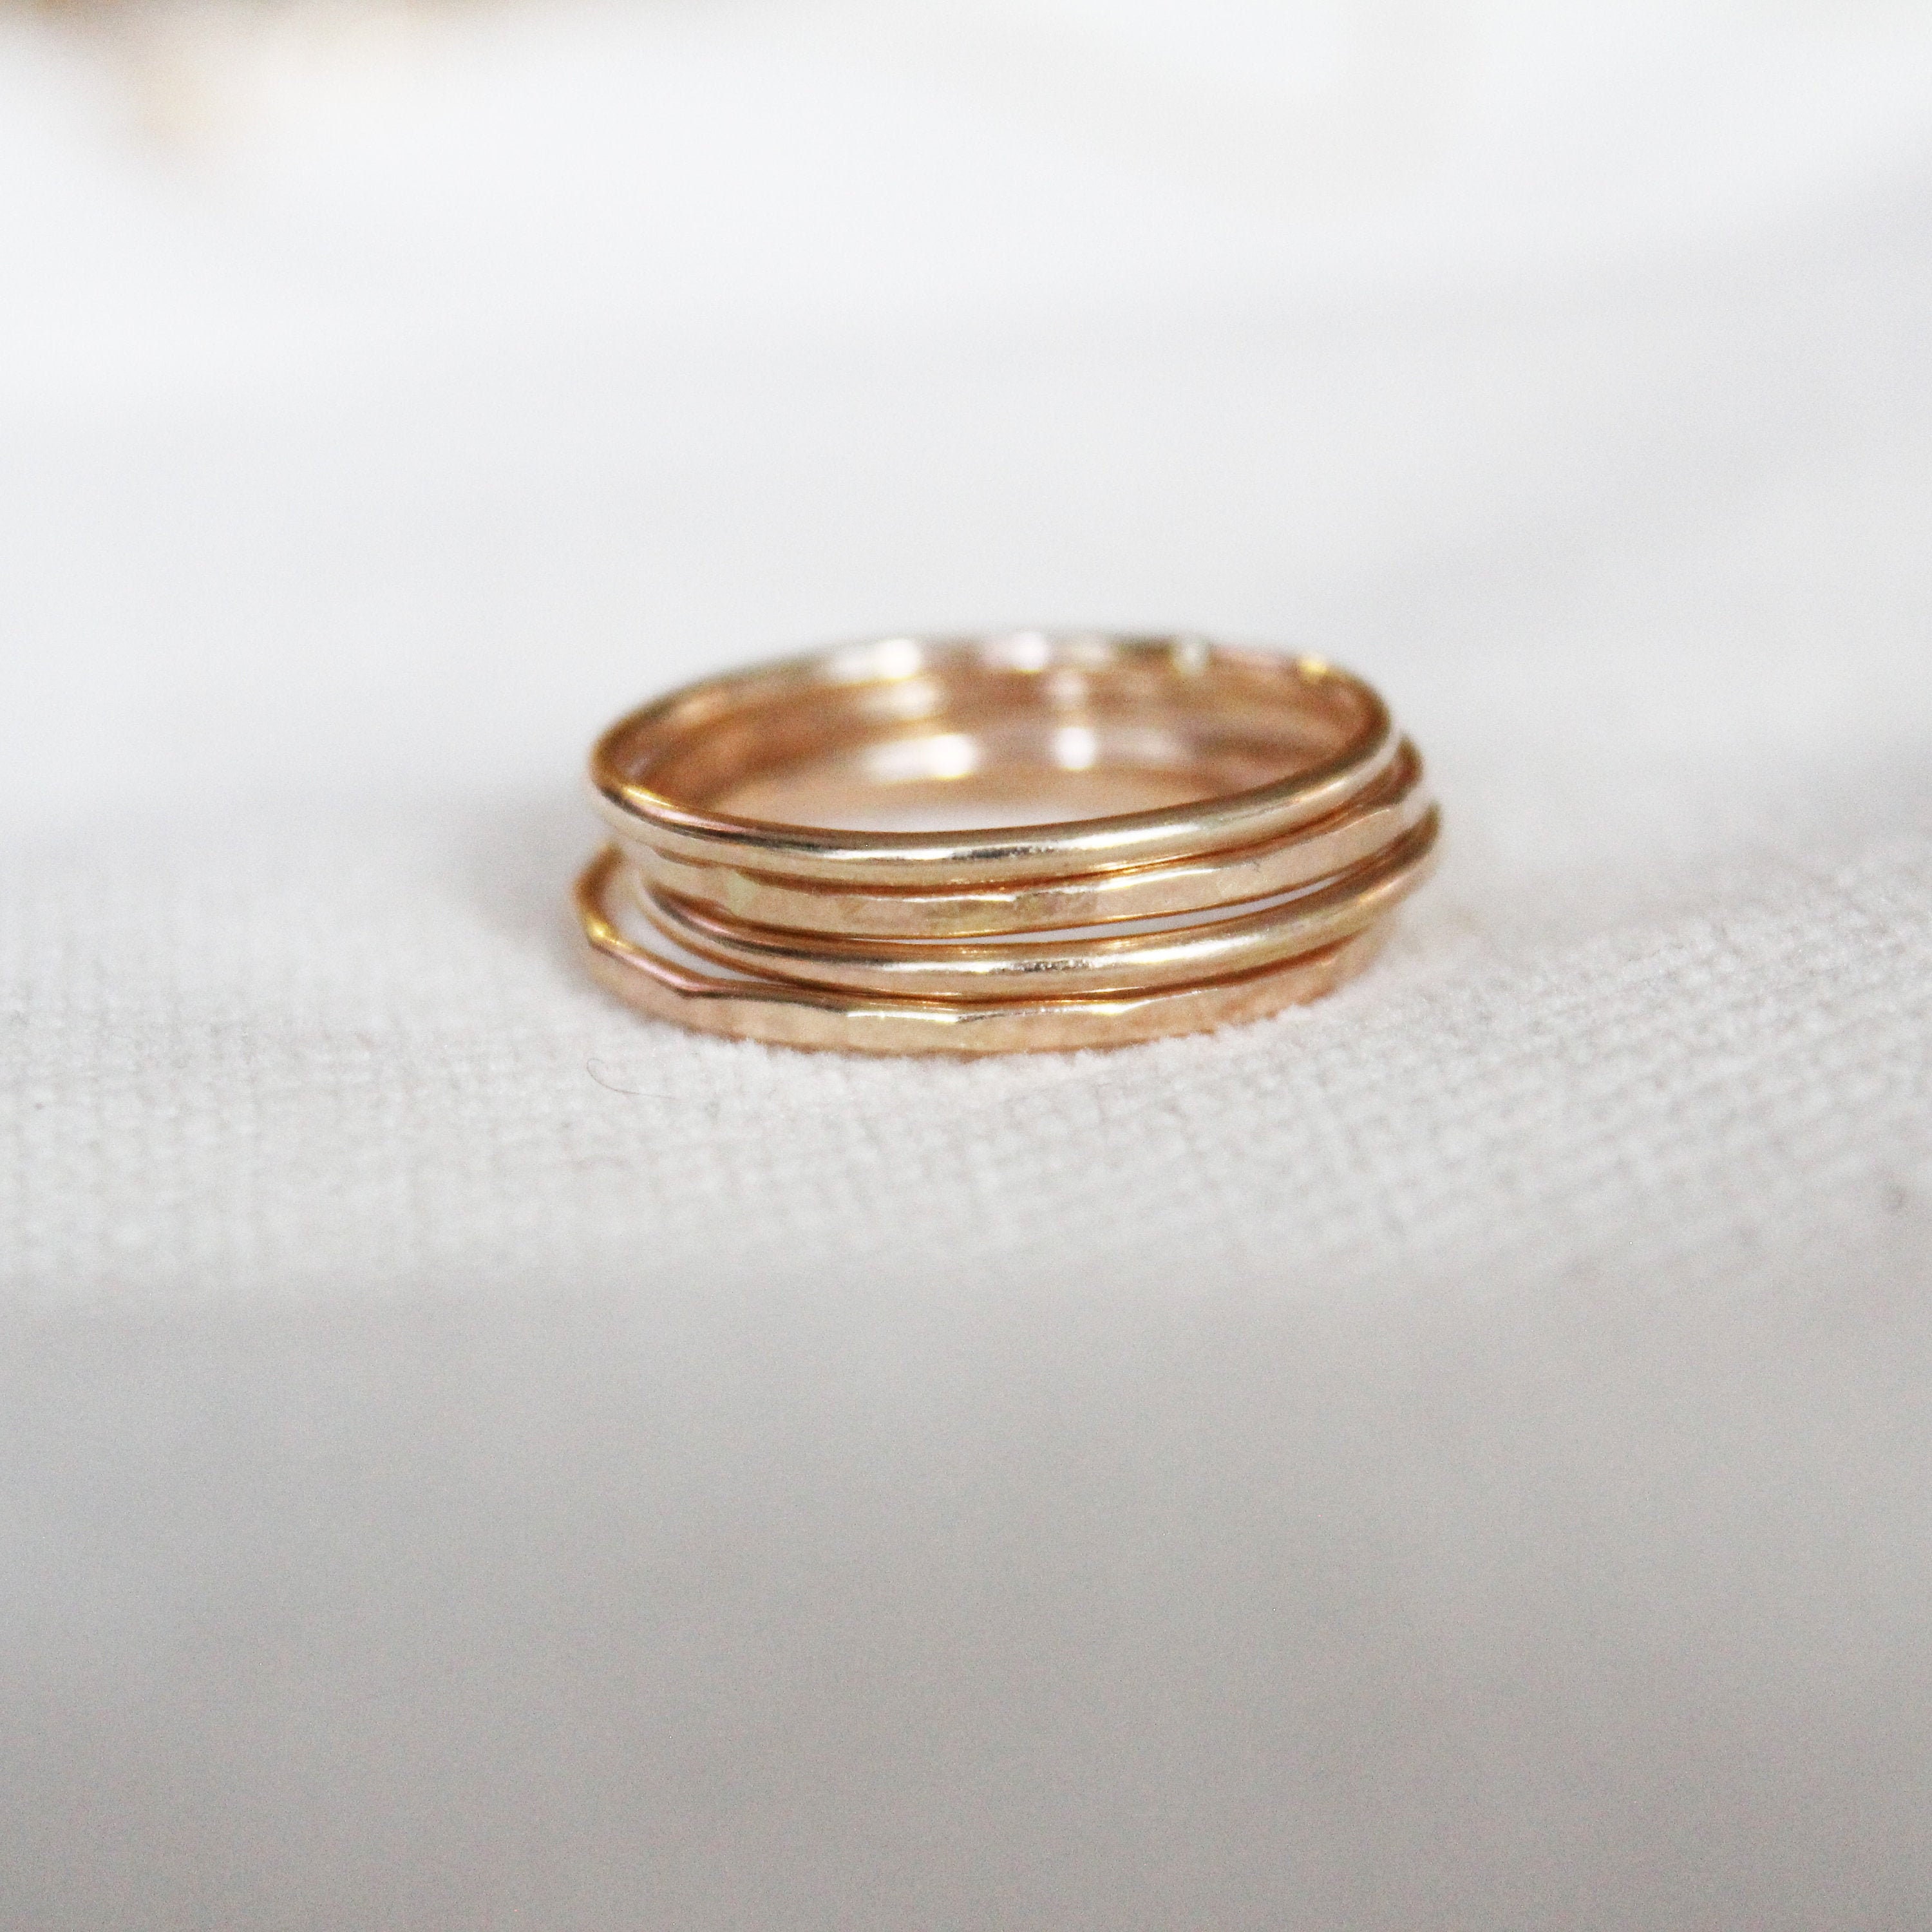 Gold Filled 14k Thin Hammered Ring Dainty Stacking Ring